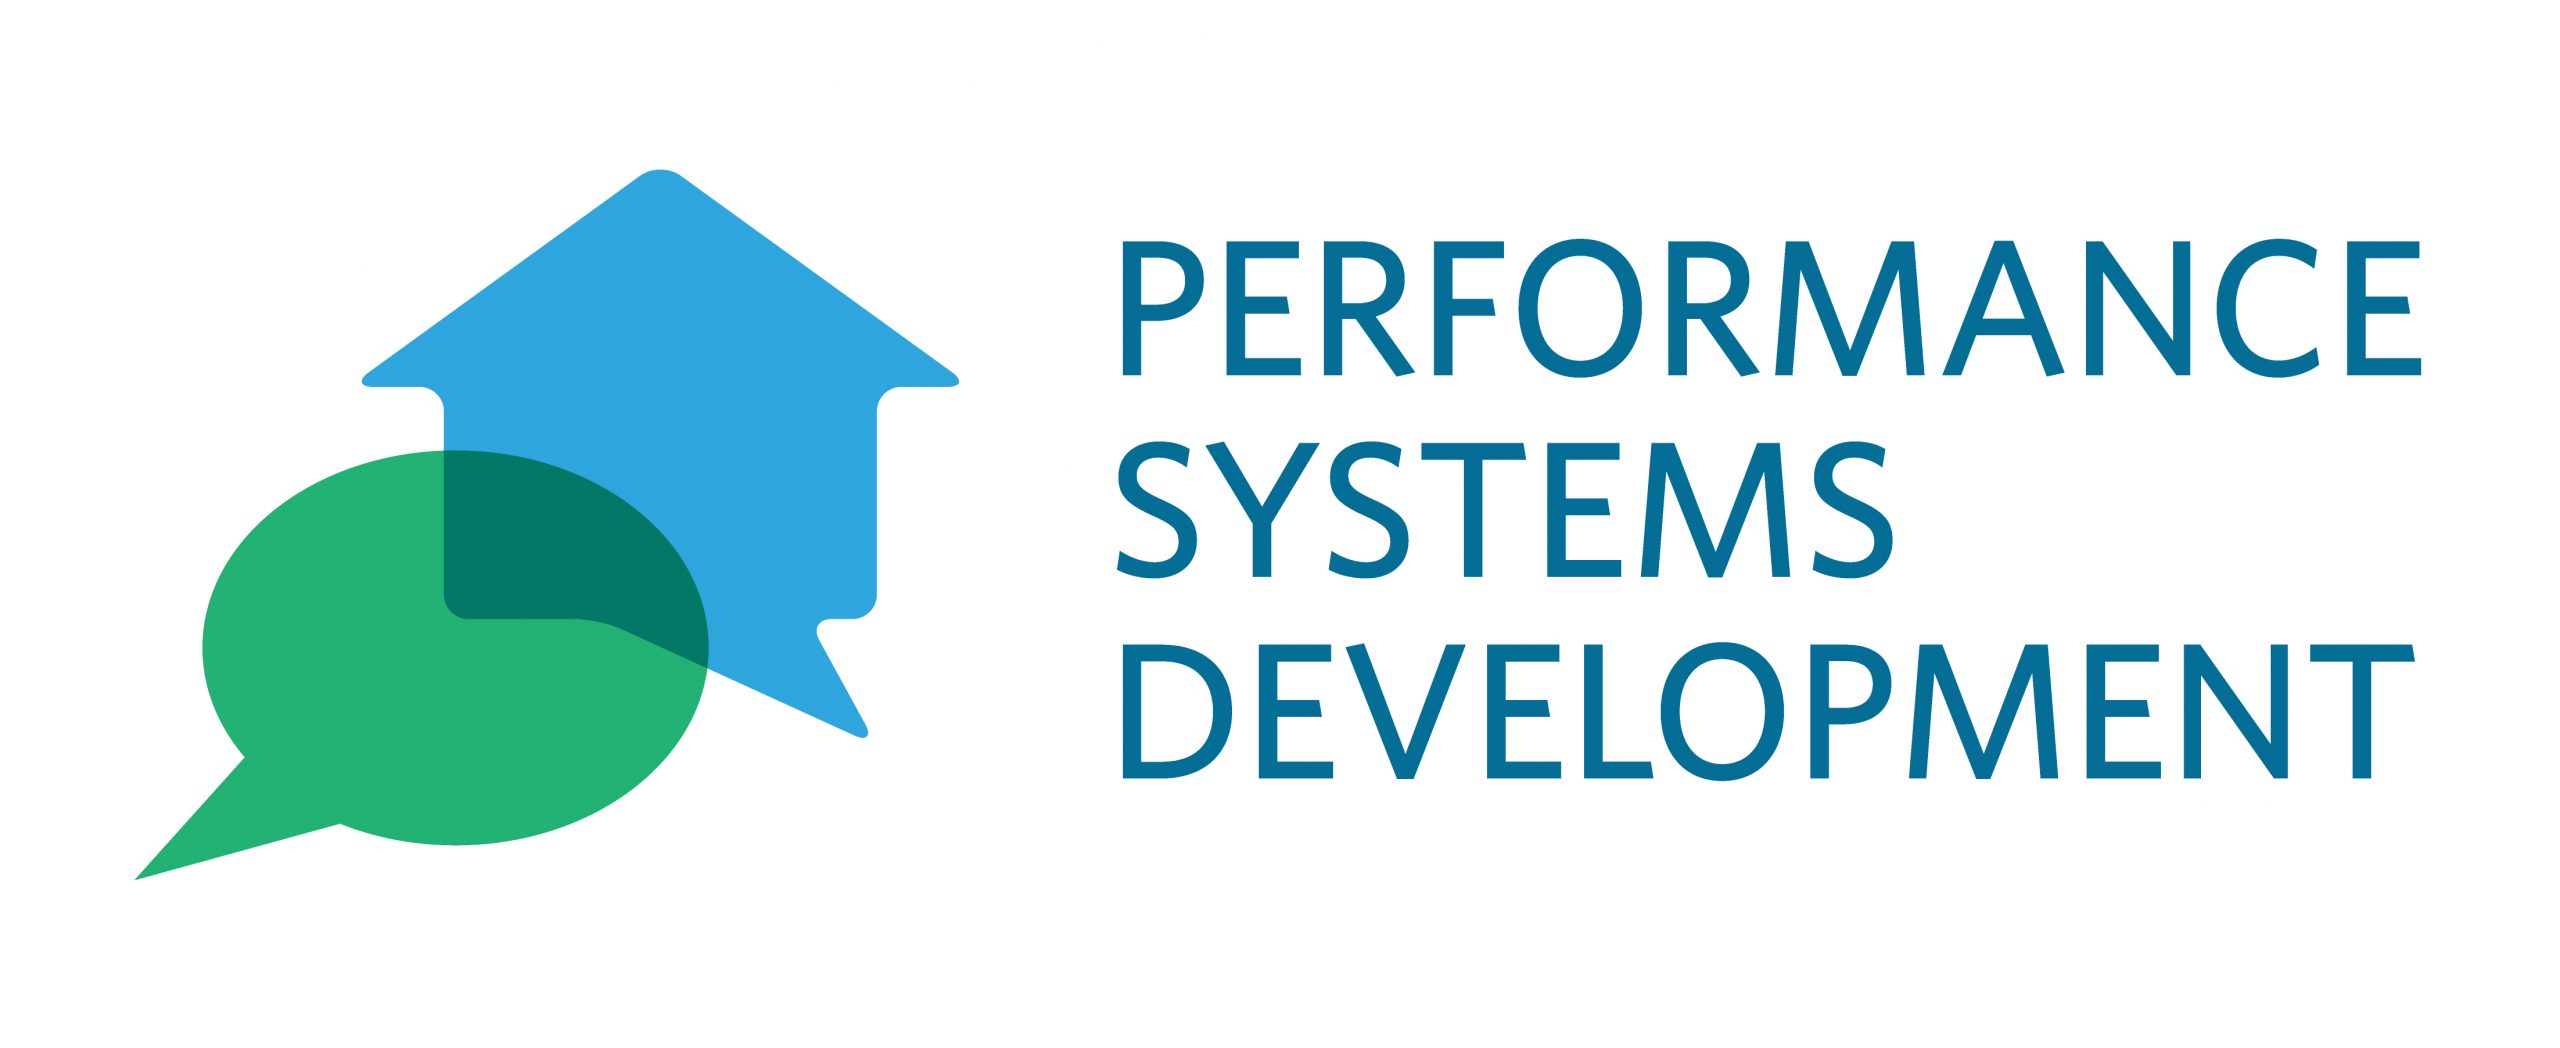 Performance Systems Development (PSD) Pivots to Virtual QA During COVID-19 Pandemic